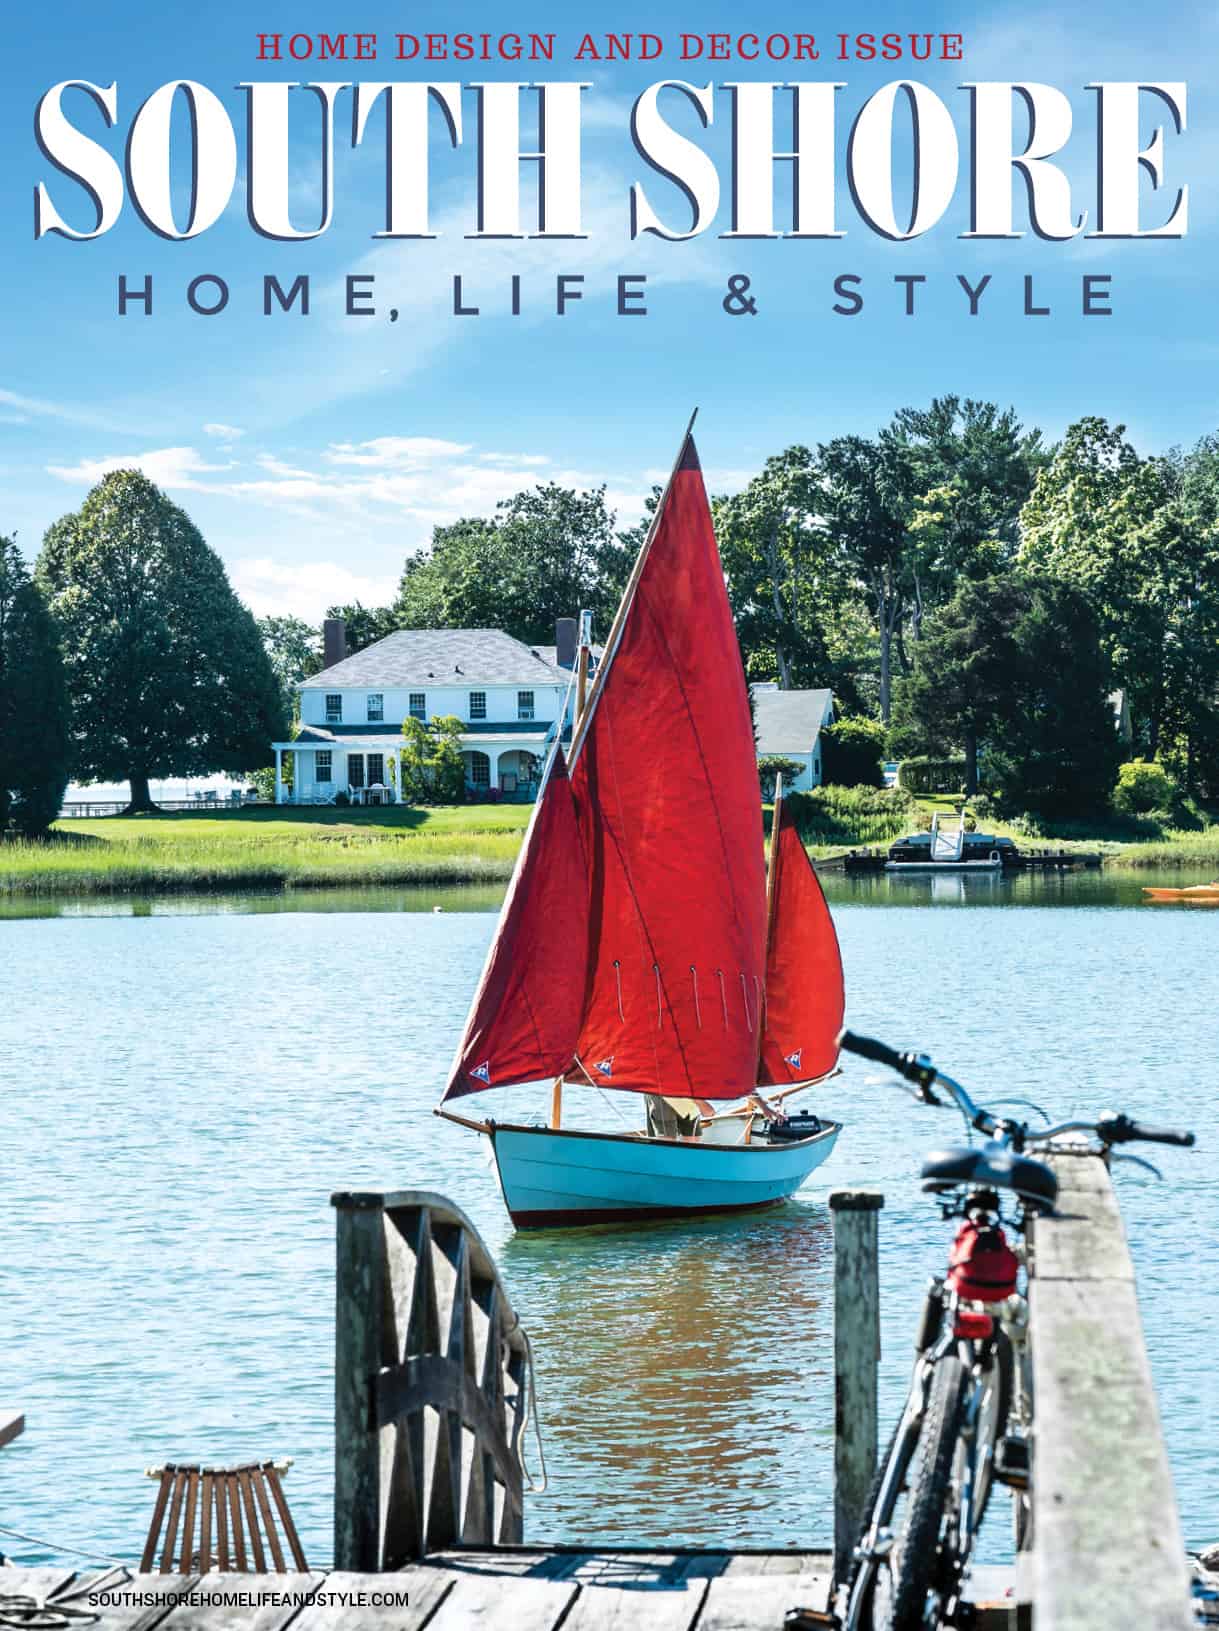 Welcome to South Shore Home, LIfe & Style Magazine